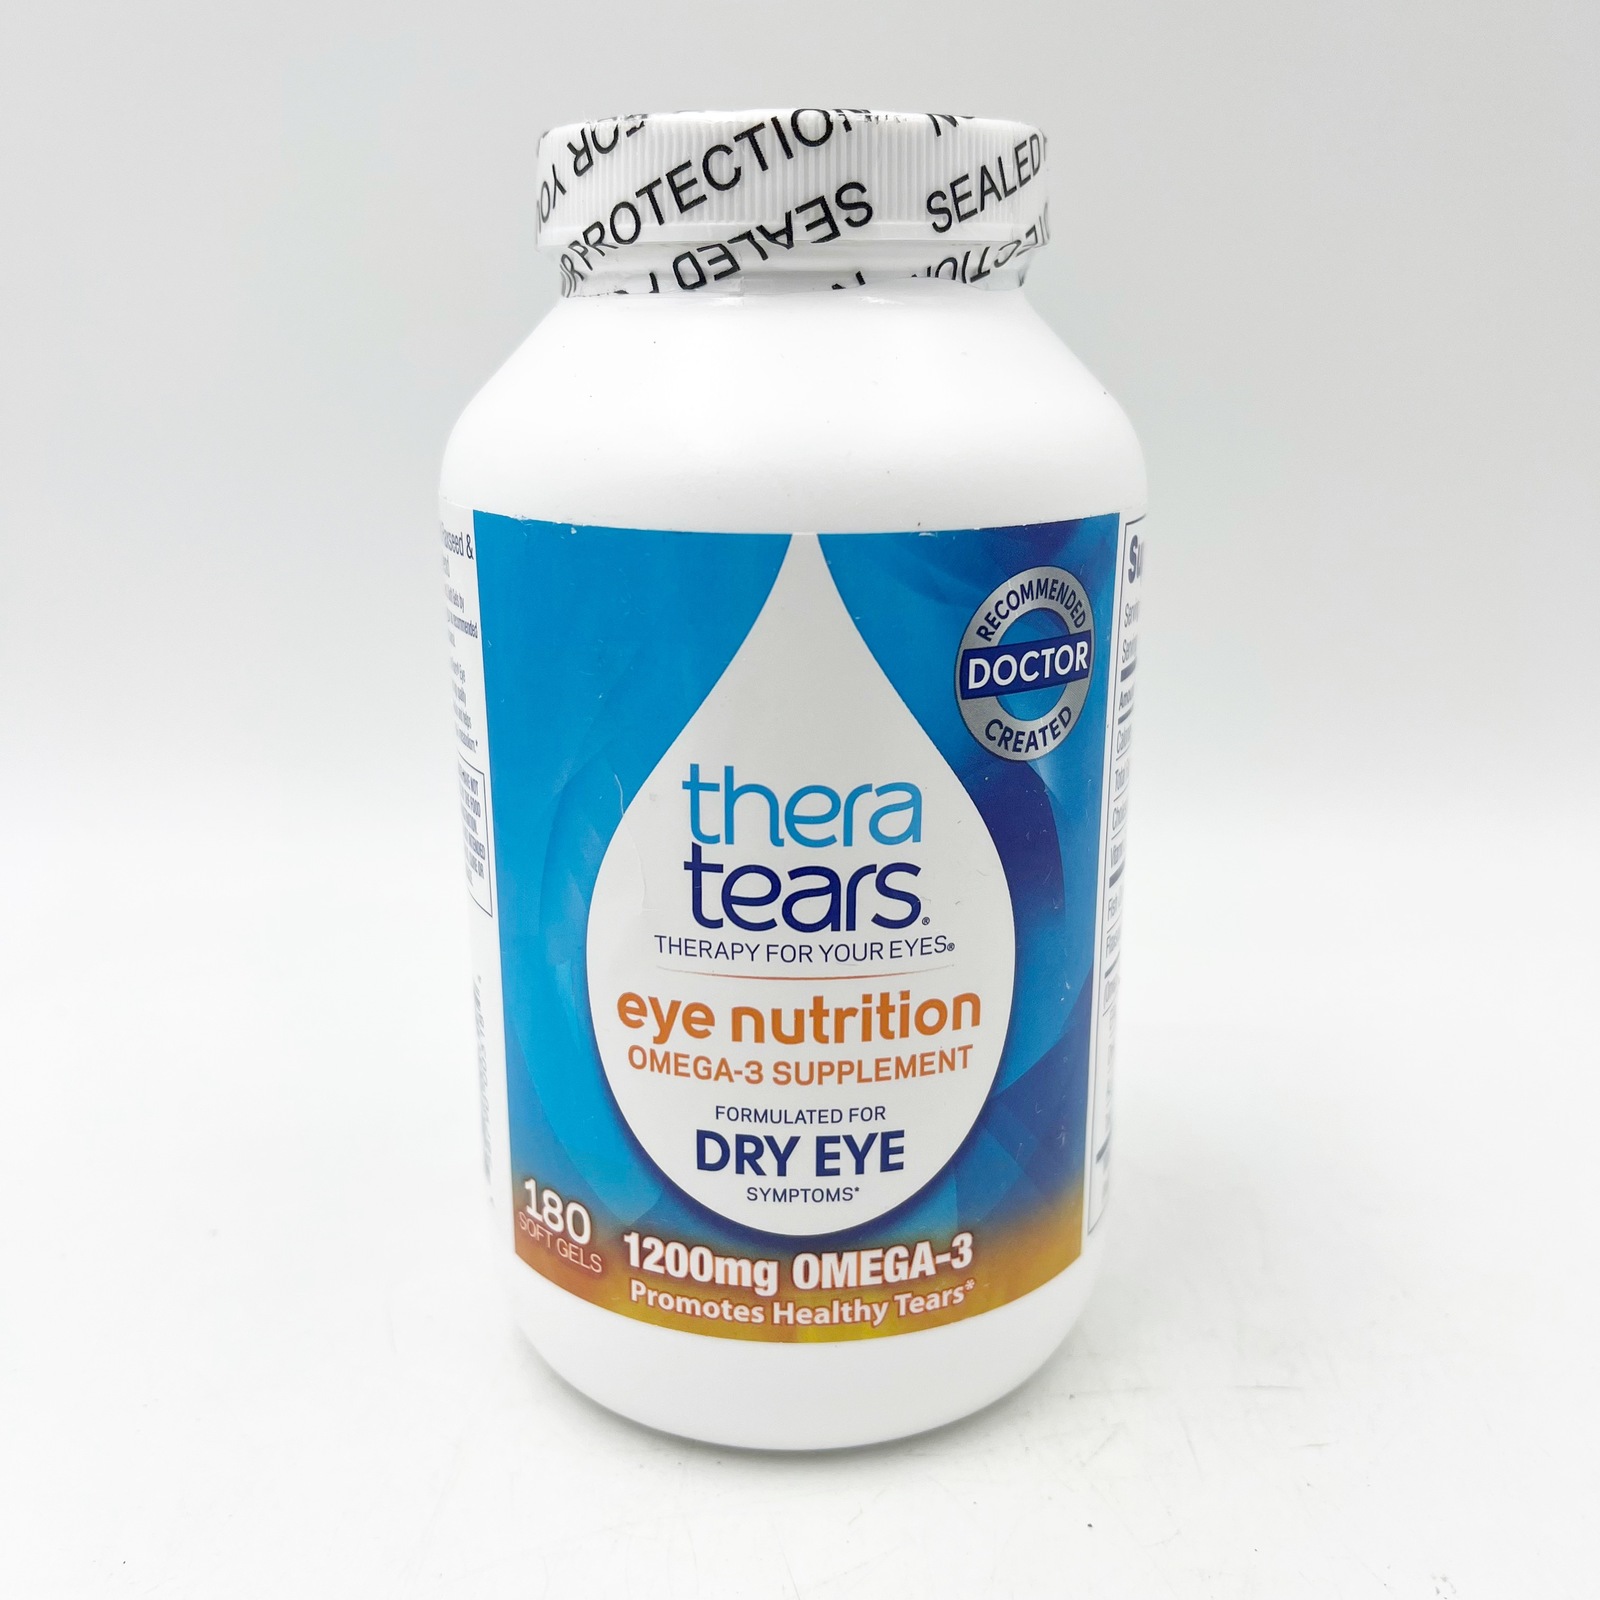 Thera Tears Eye Nutrition 180 Soft Gels 1200mg Omega-3 Supplement BB 1/25